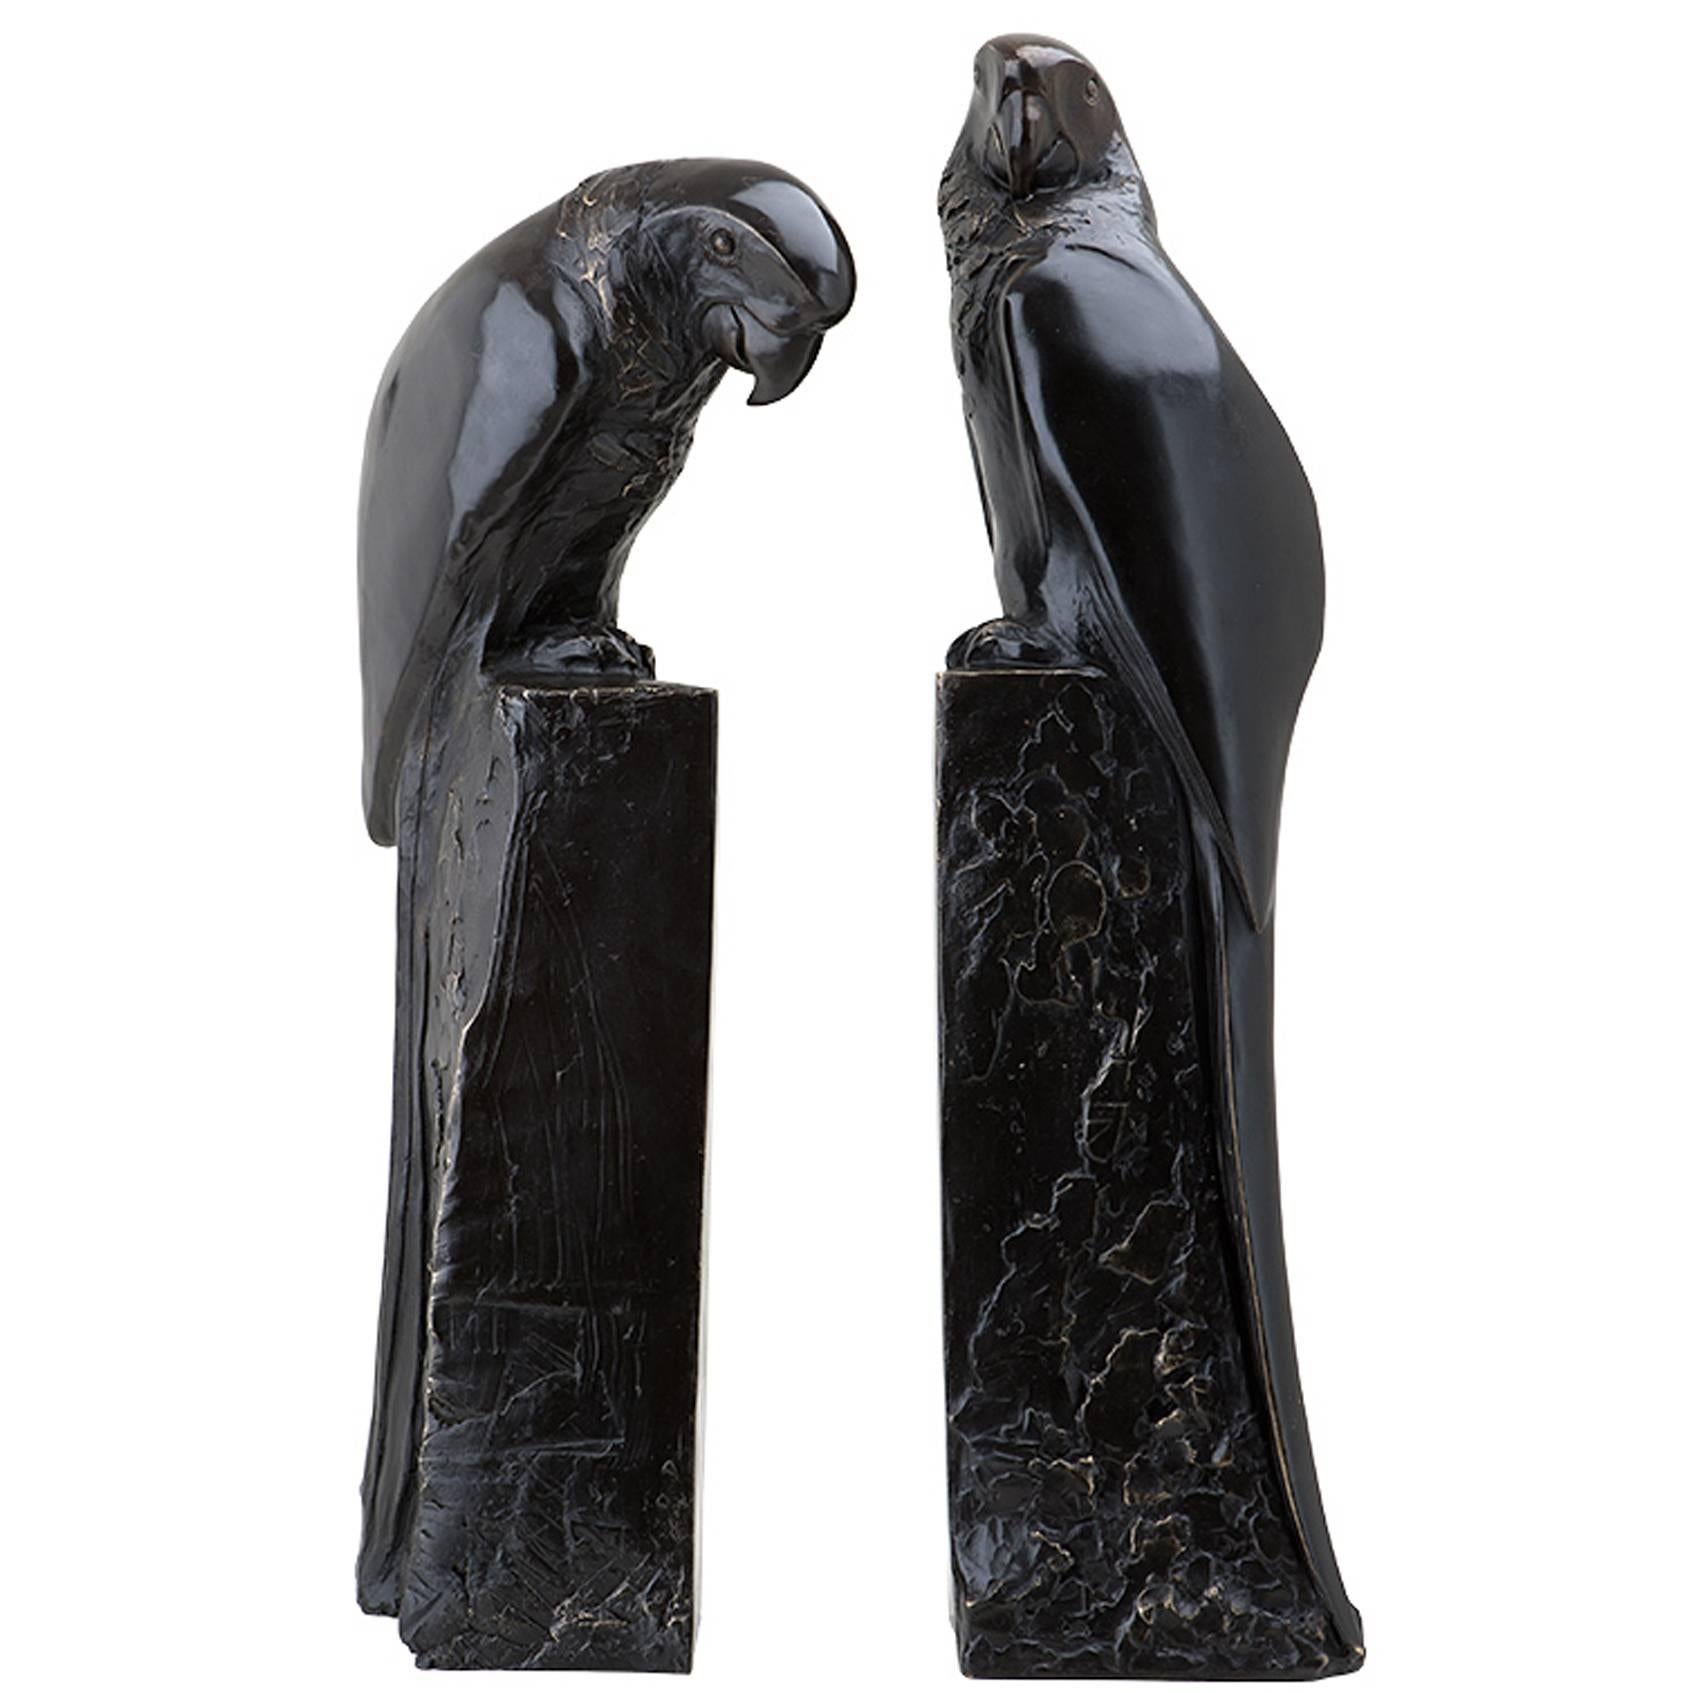 Parrot Set of Two Book Ends in Solid Bronze Patina